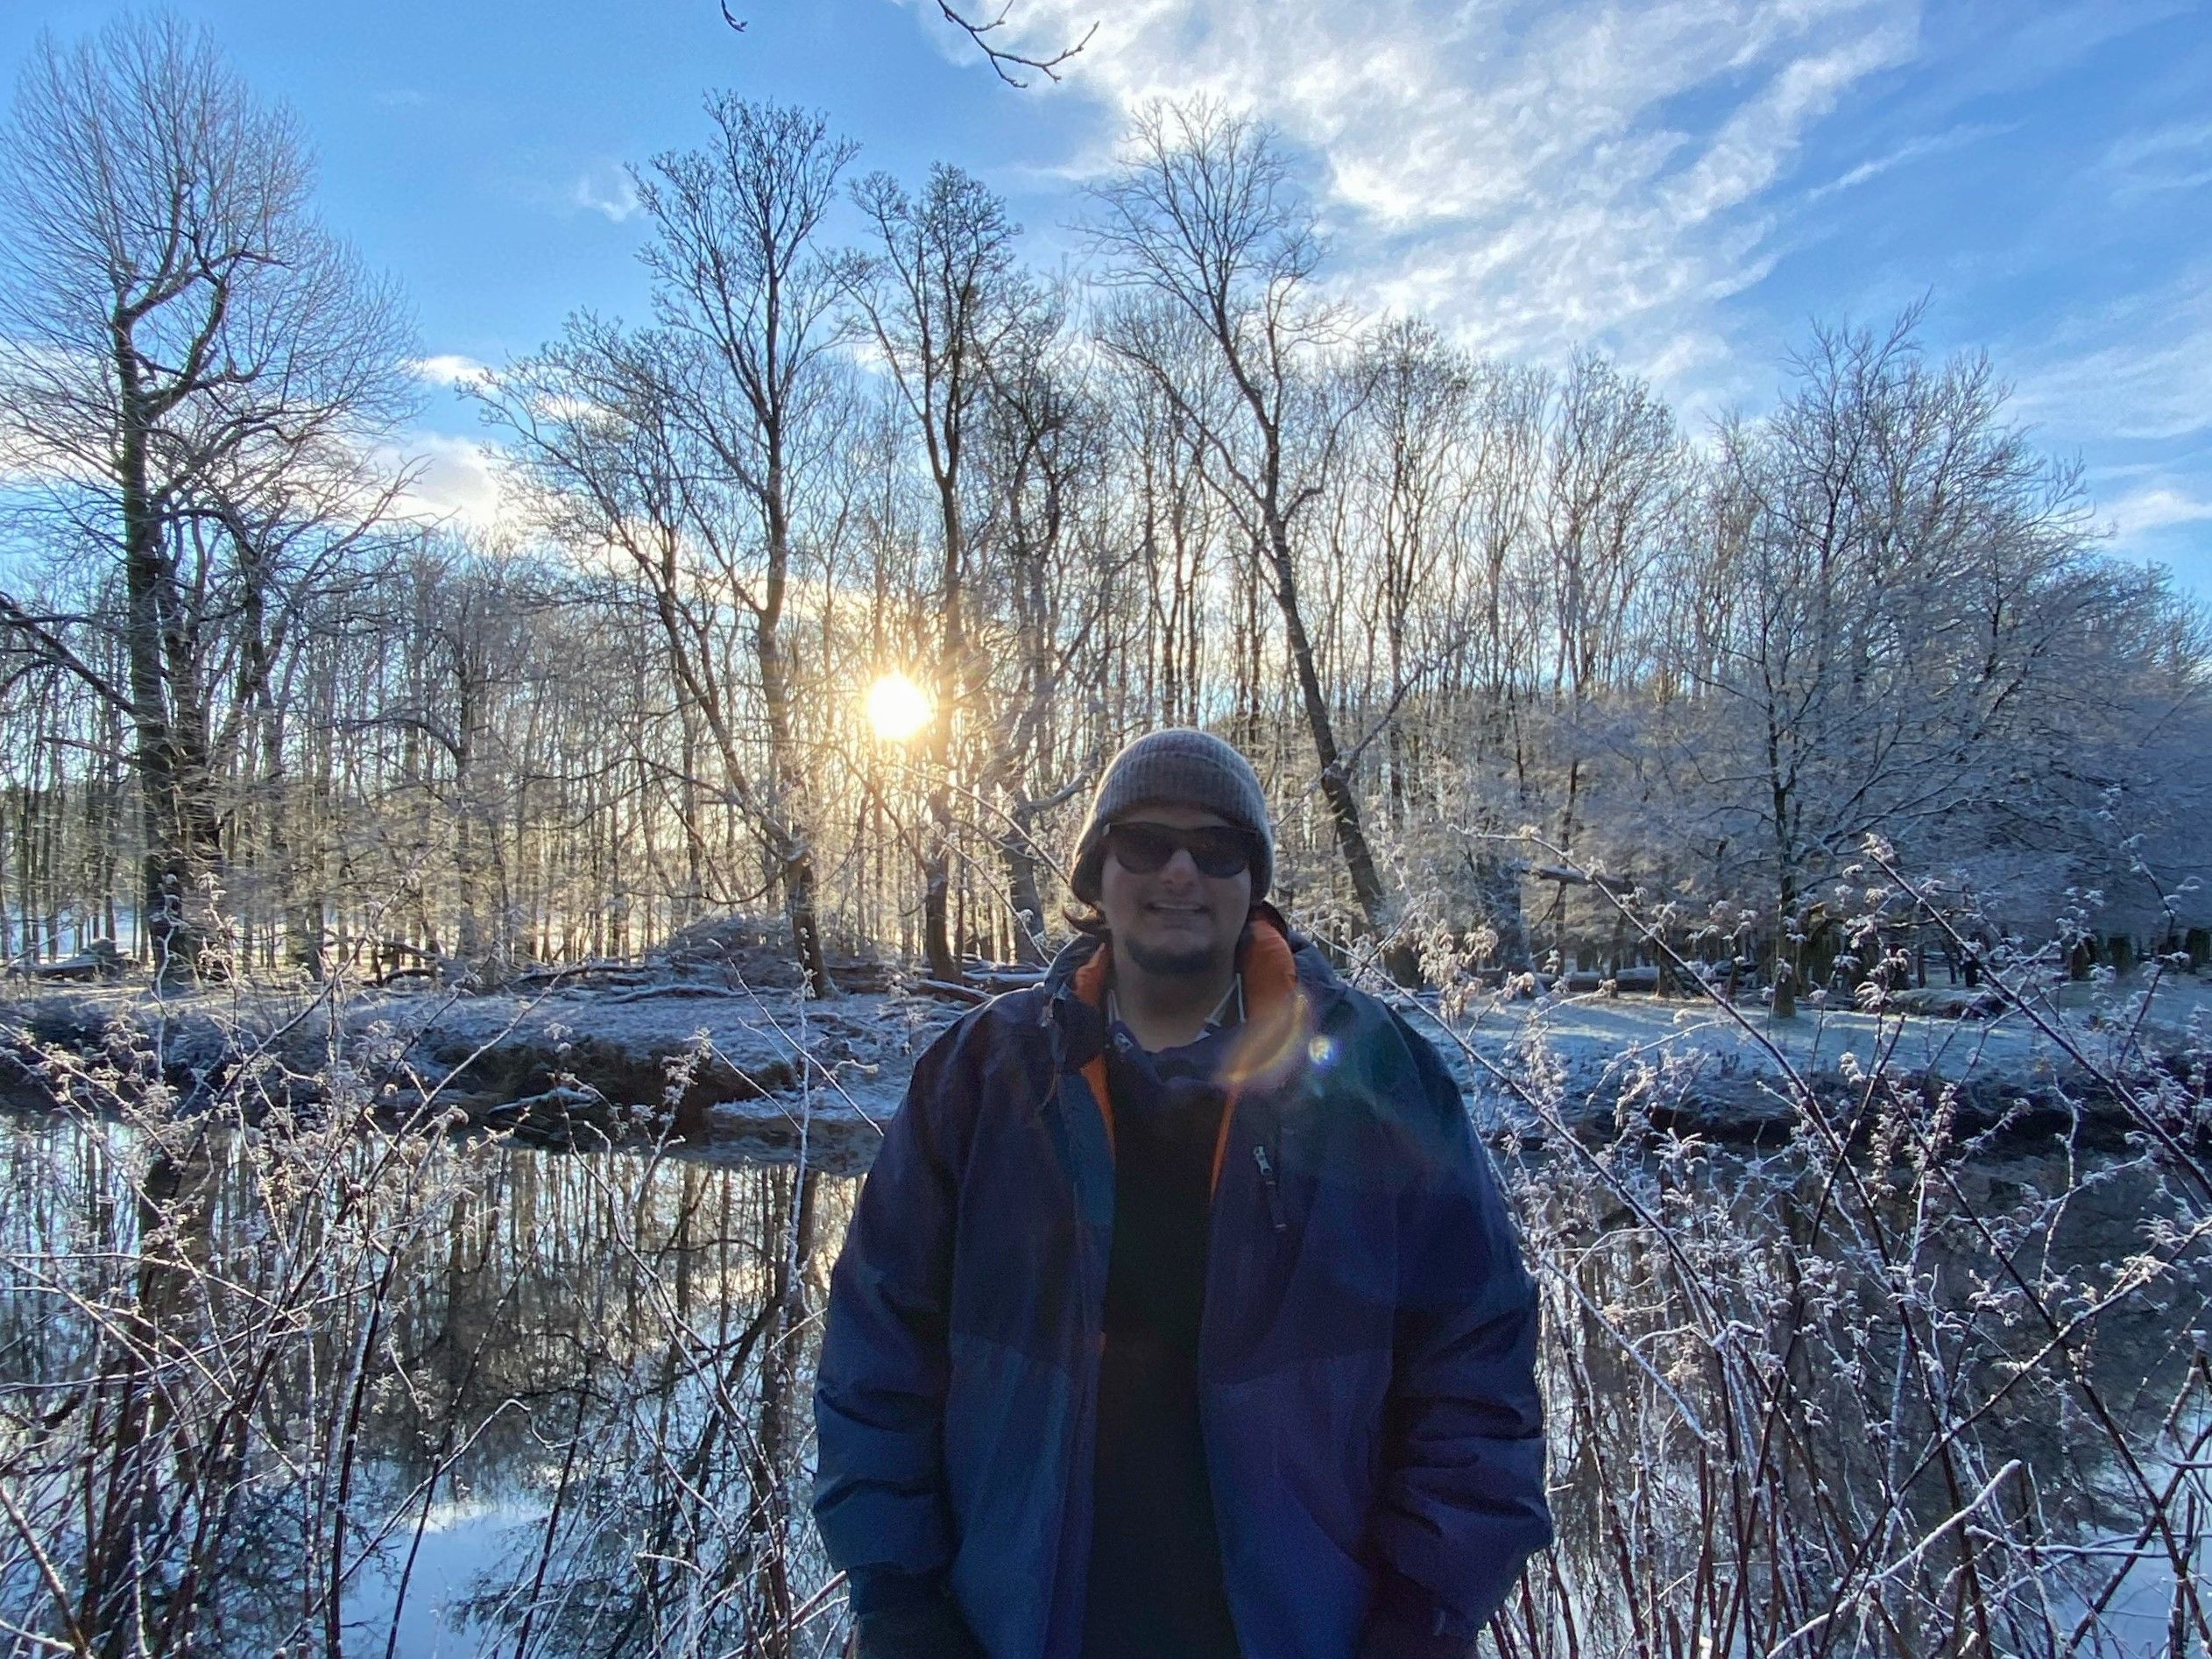 Rishabh stands in the middle smiling with a winter jacket, sunglasses and a hat on. In the background we can see a reflective body of water and the evening sun above his head. We can see trees without leaves covered in snow.